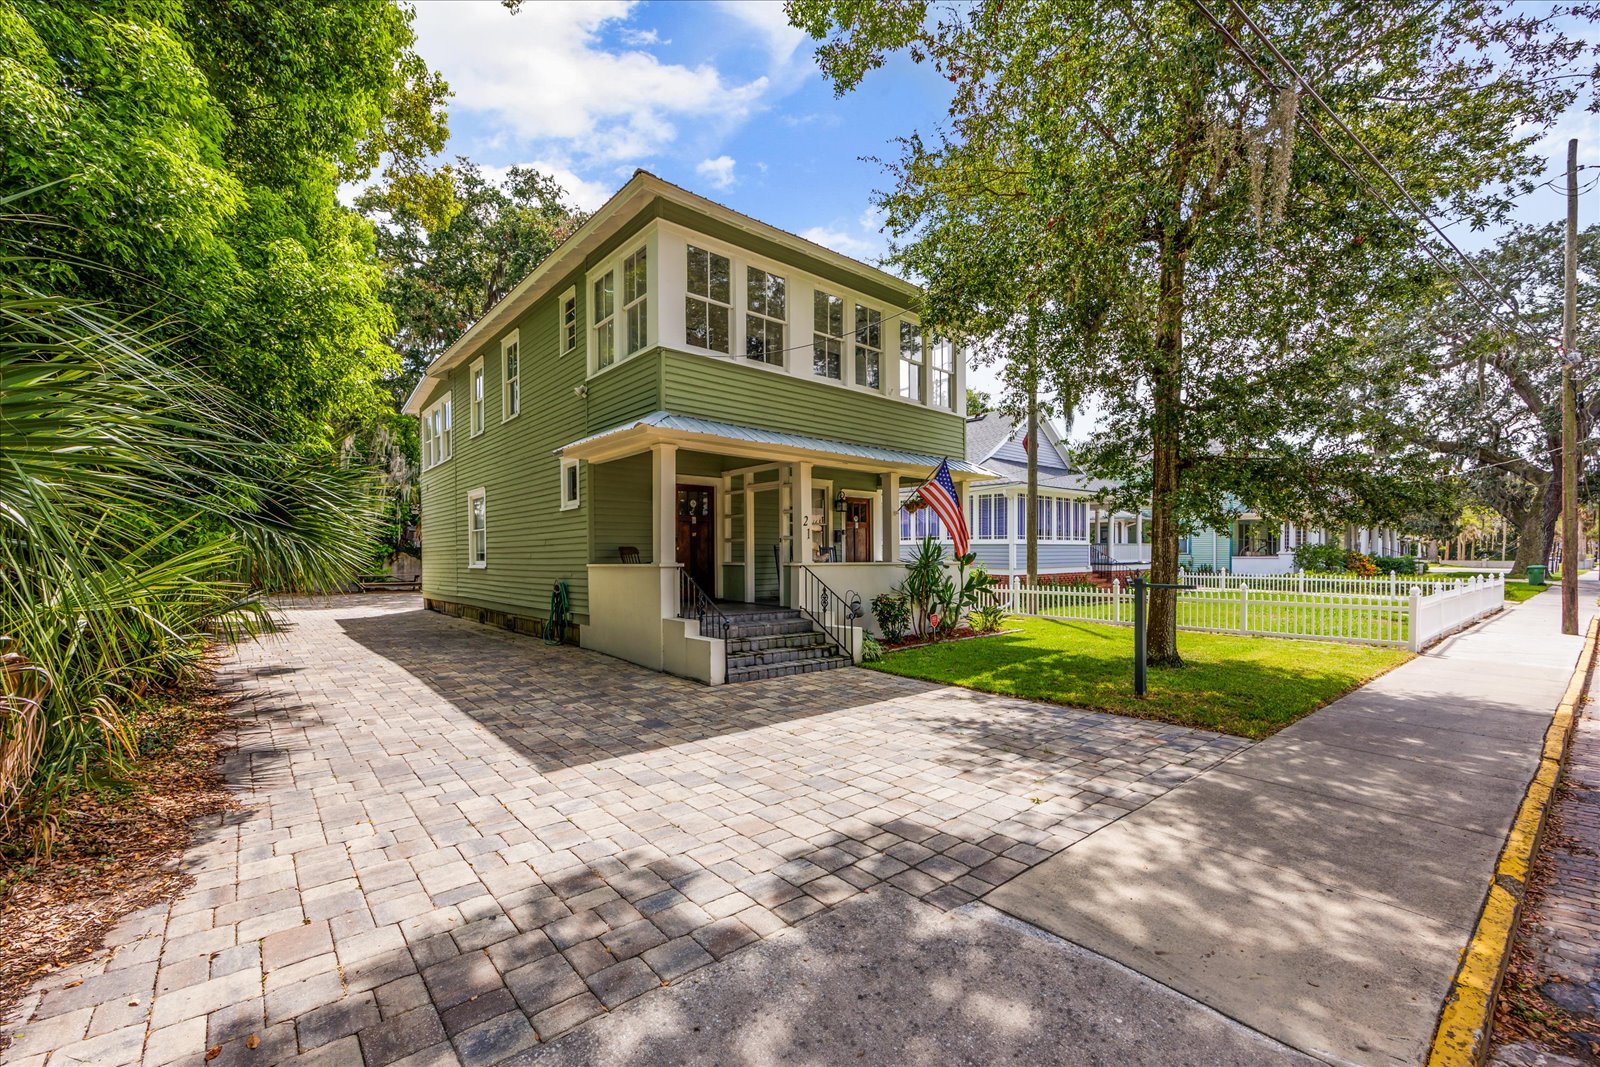 This gorgeous St. Augustine duplex offers driveway parking for 2 vehicles